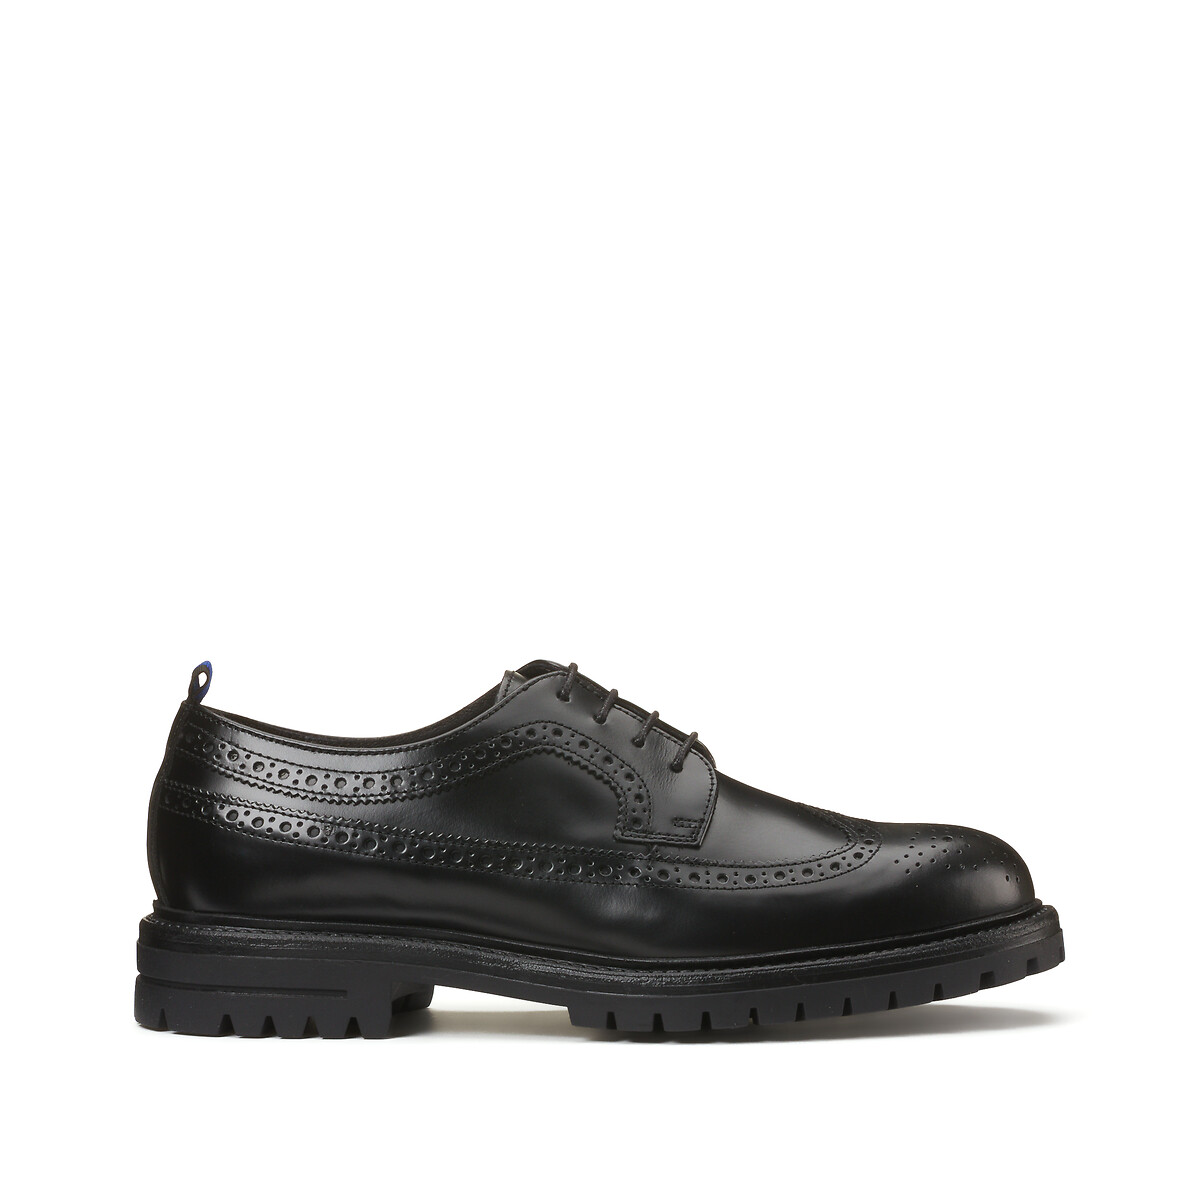 Leather Perforated Toe Brogues